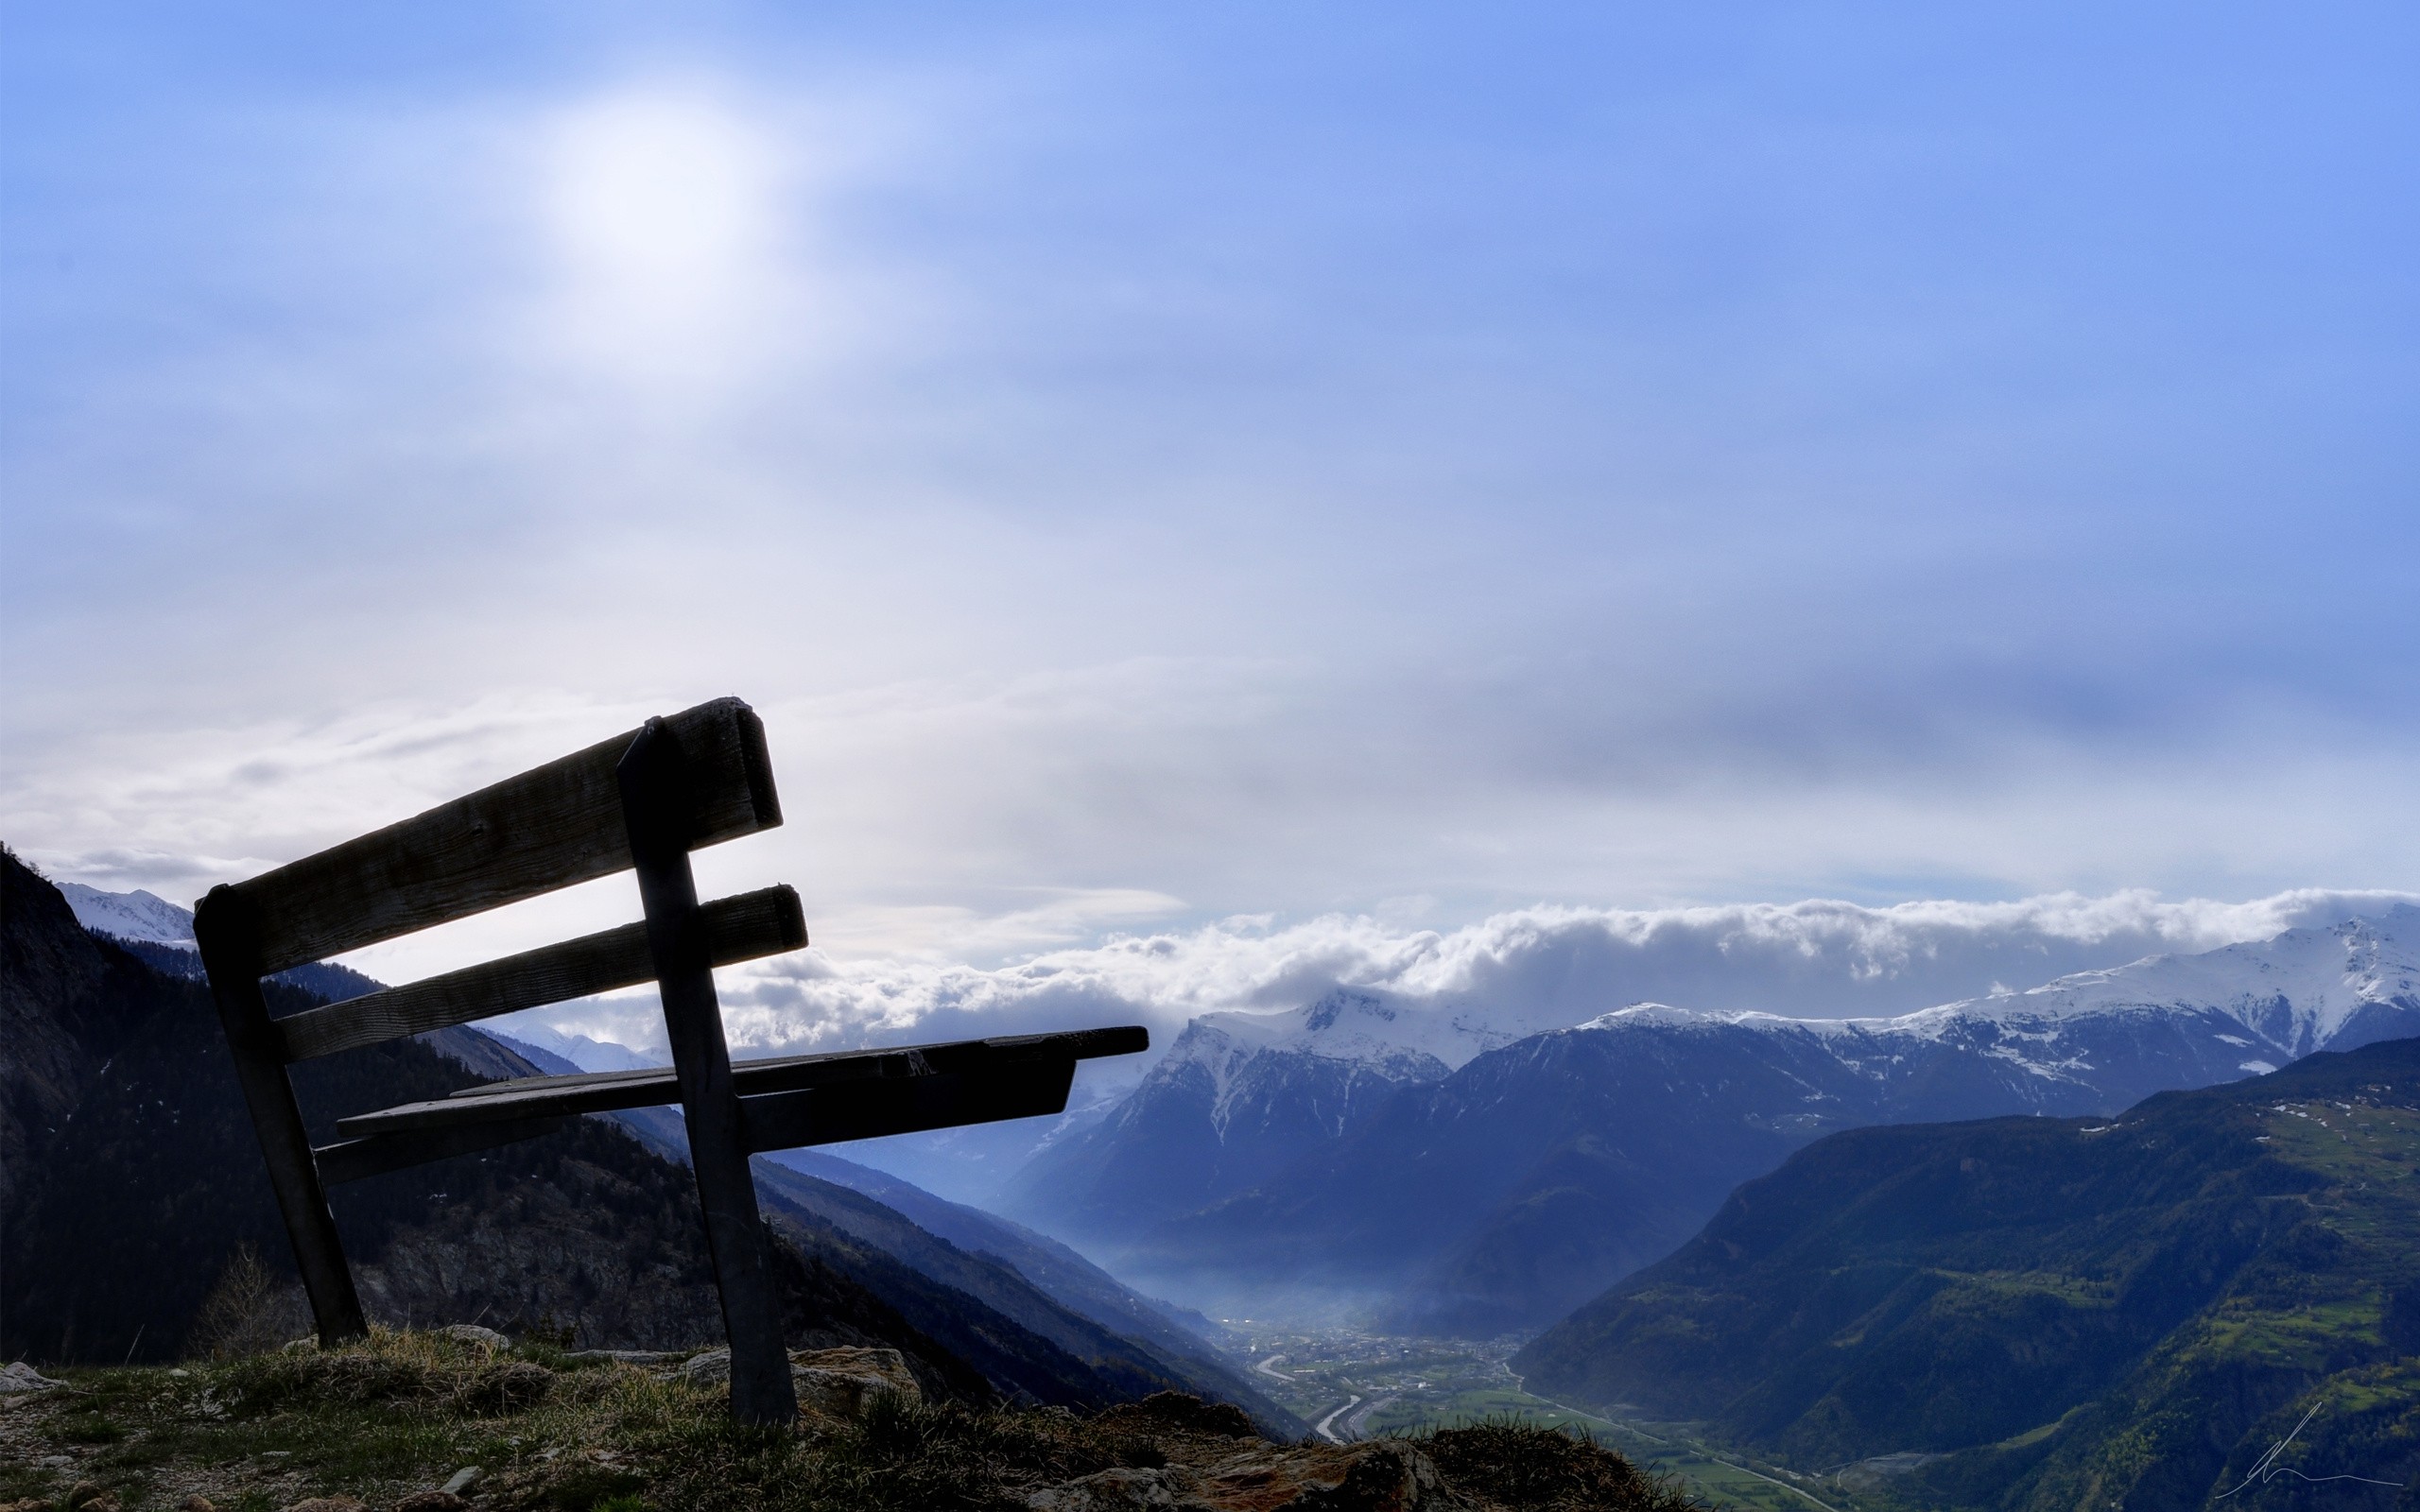 Bench at the top of the mountain wallpaper 2560x1600 2958 2560x1600